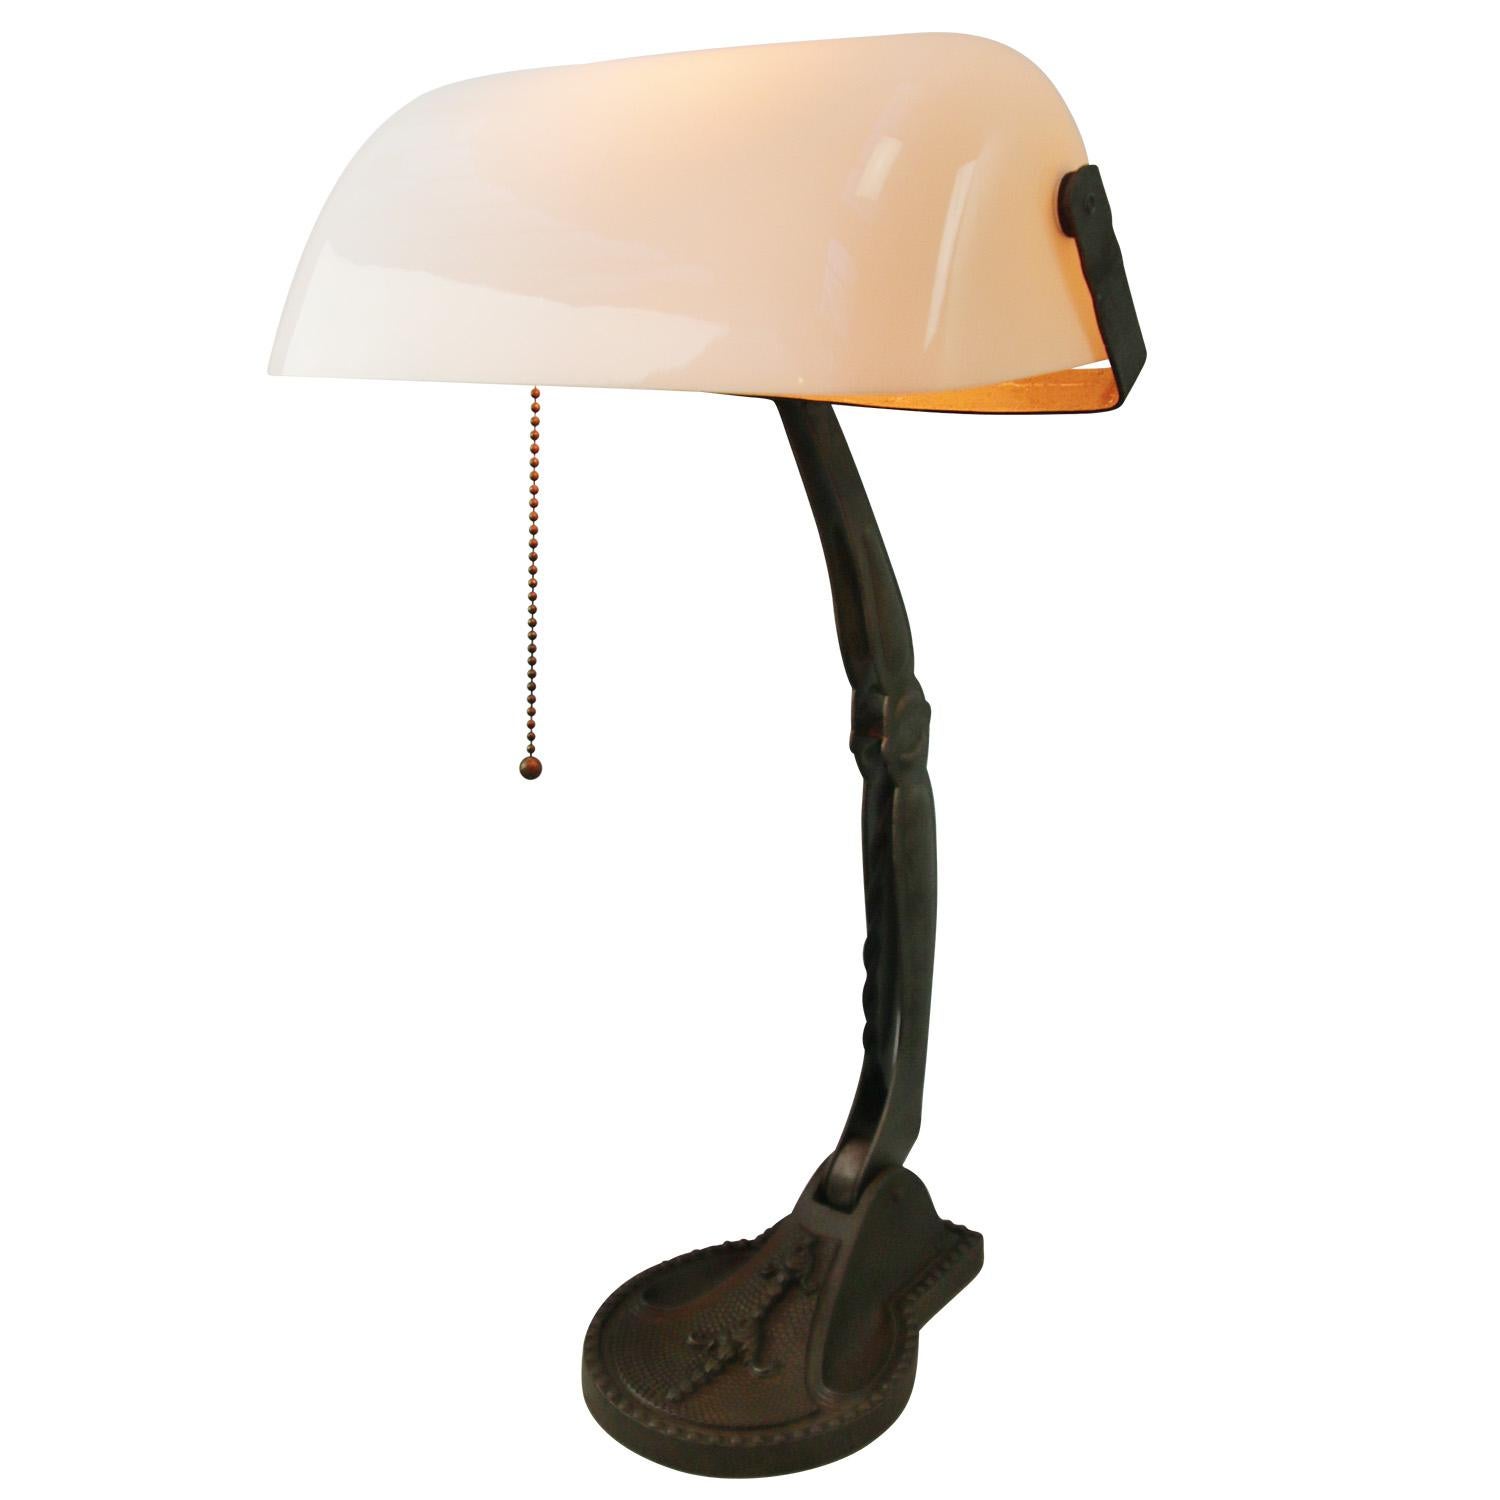 White opaline glass, cast iron desk light / banker’s lamp
2,5 meter black cotton flex, plug and pull switch

Also, available with US/UK plug

Weight: 2.70 kg / 6 lb

Priced per individual item. All lamps have been made suitable by